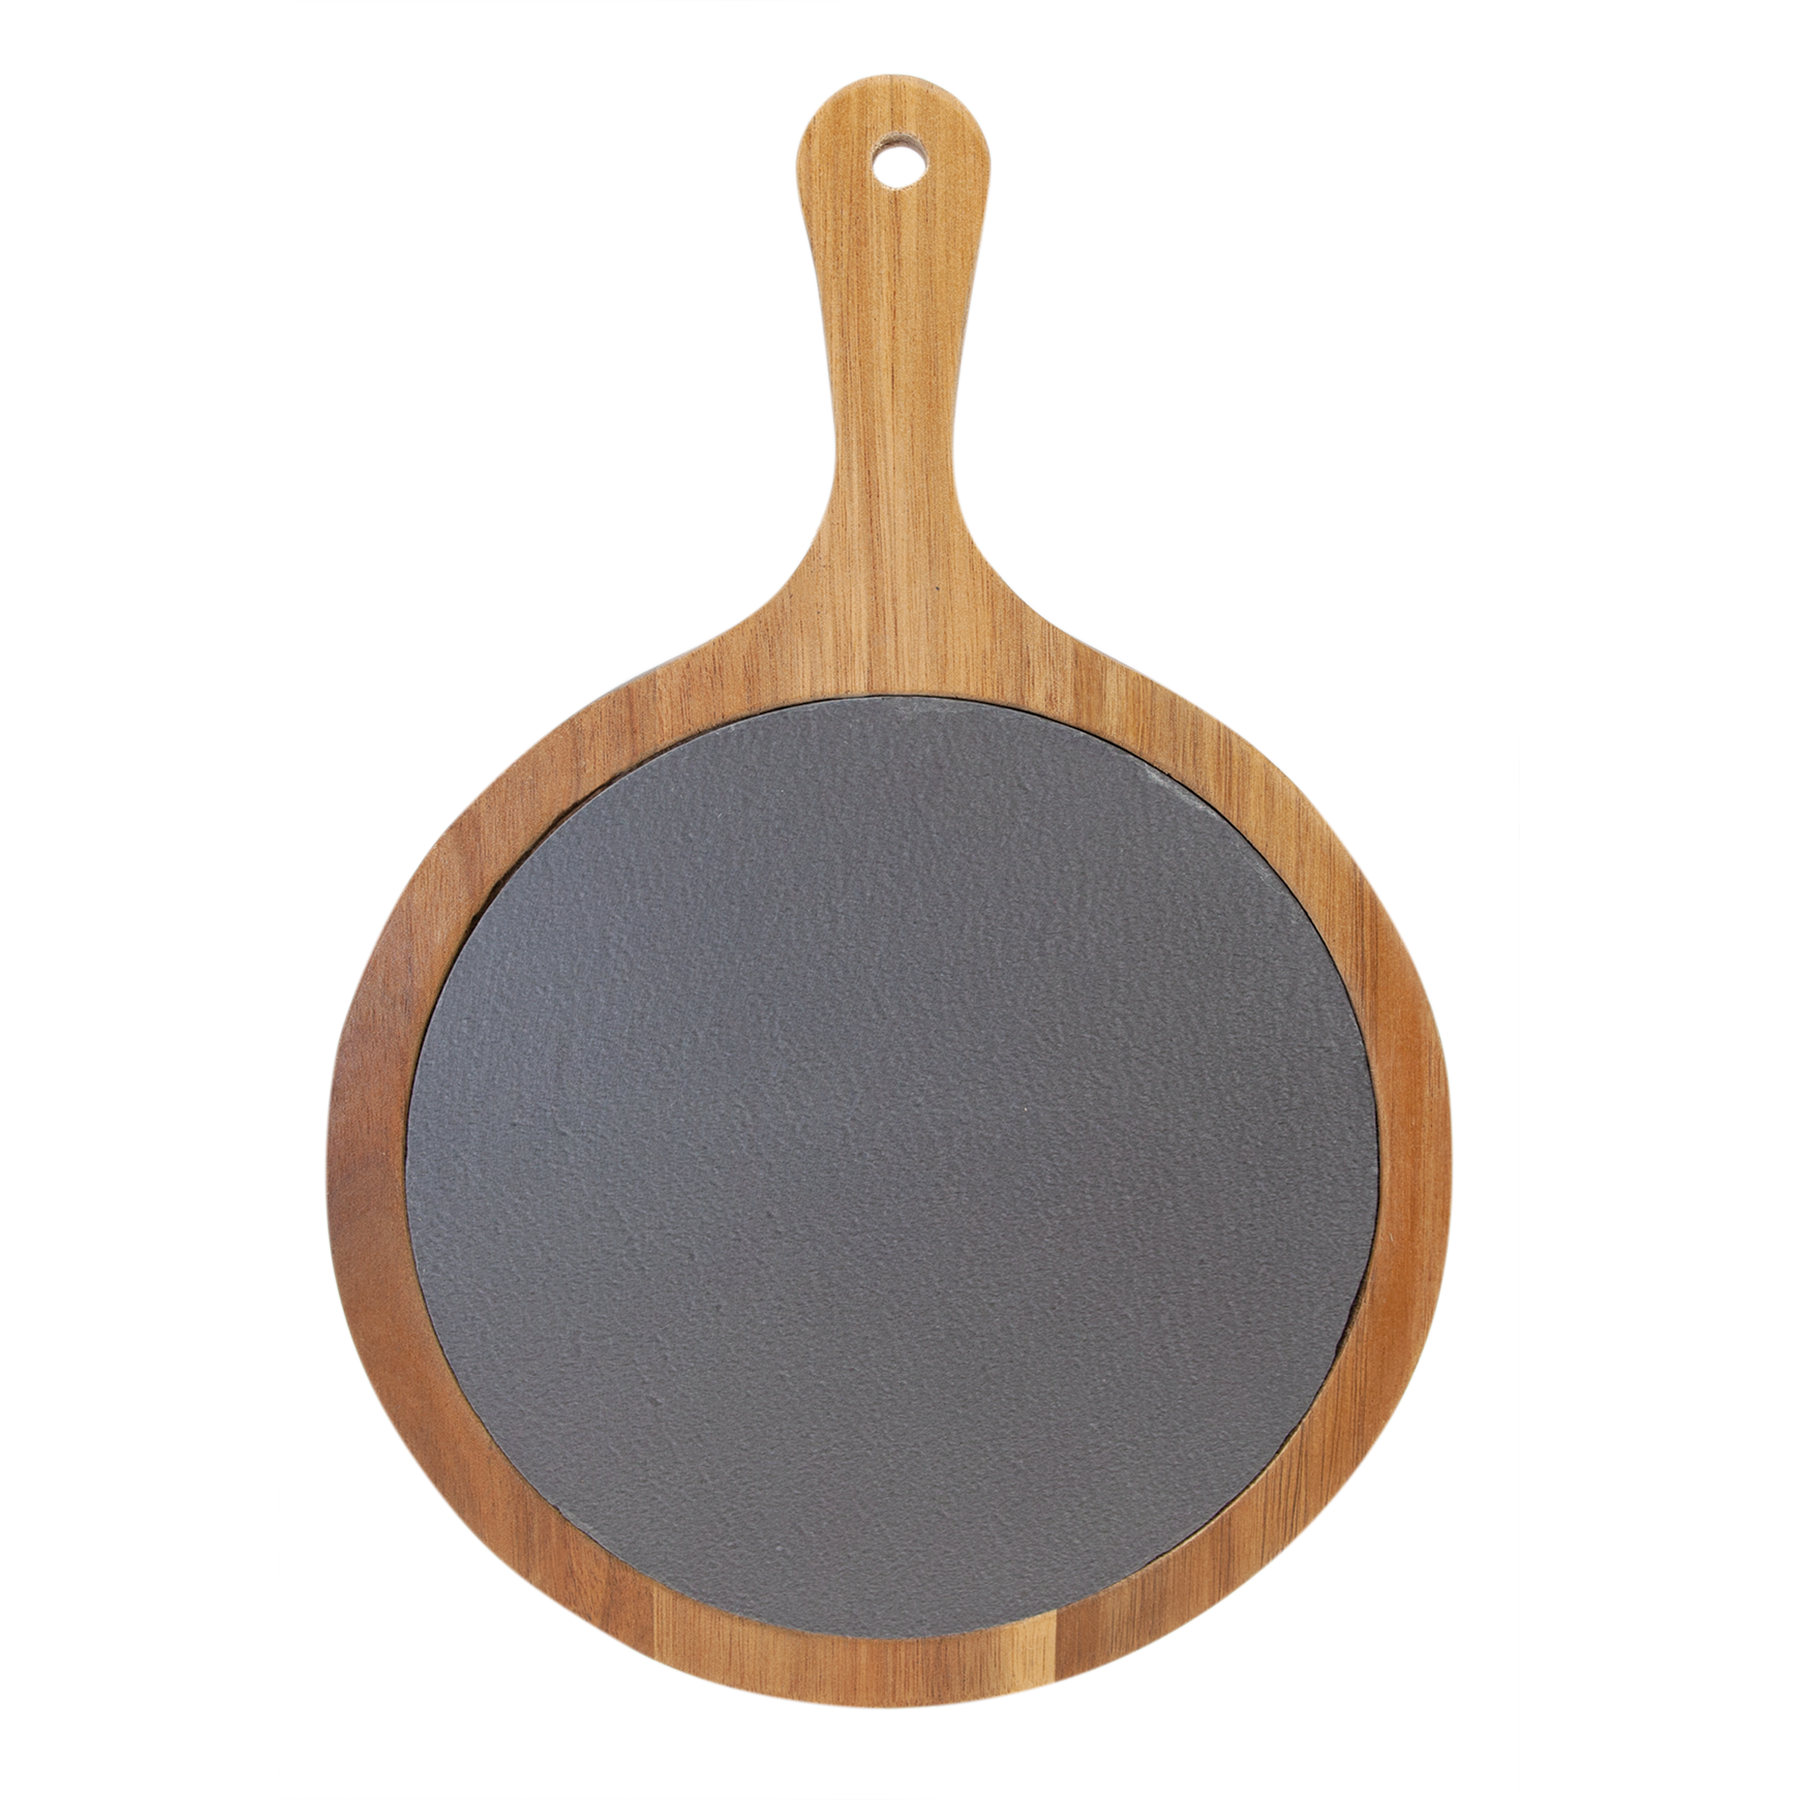 8 1/4" x 12 1/4" Round Acacia Wood/Slate Serving Board with Handle